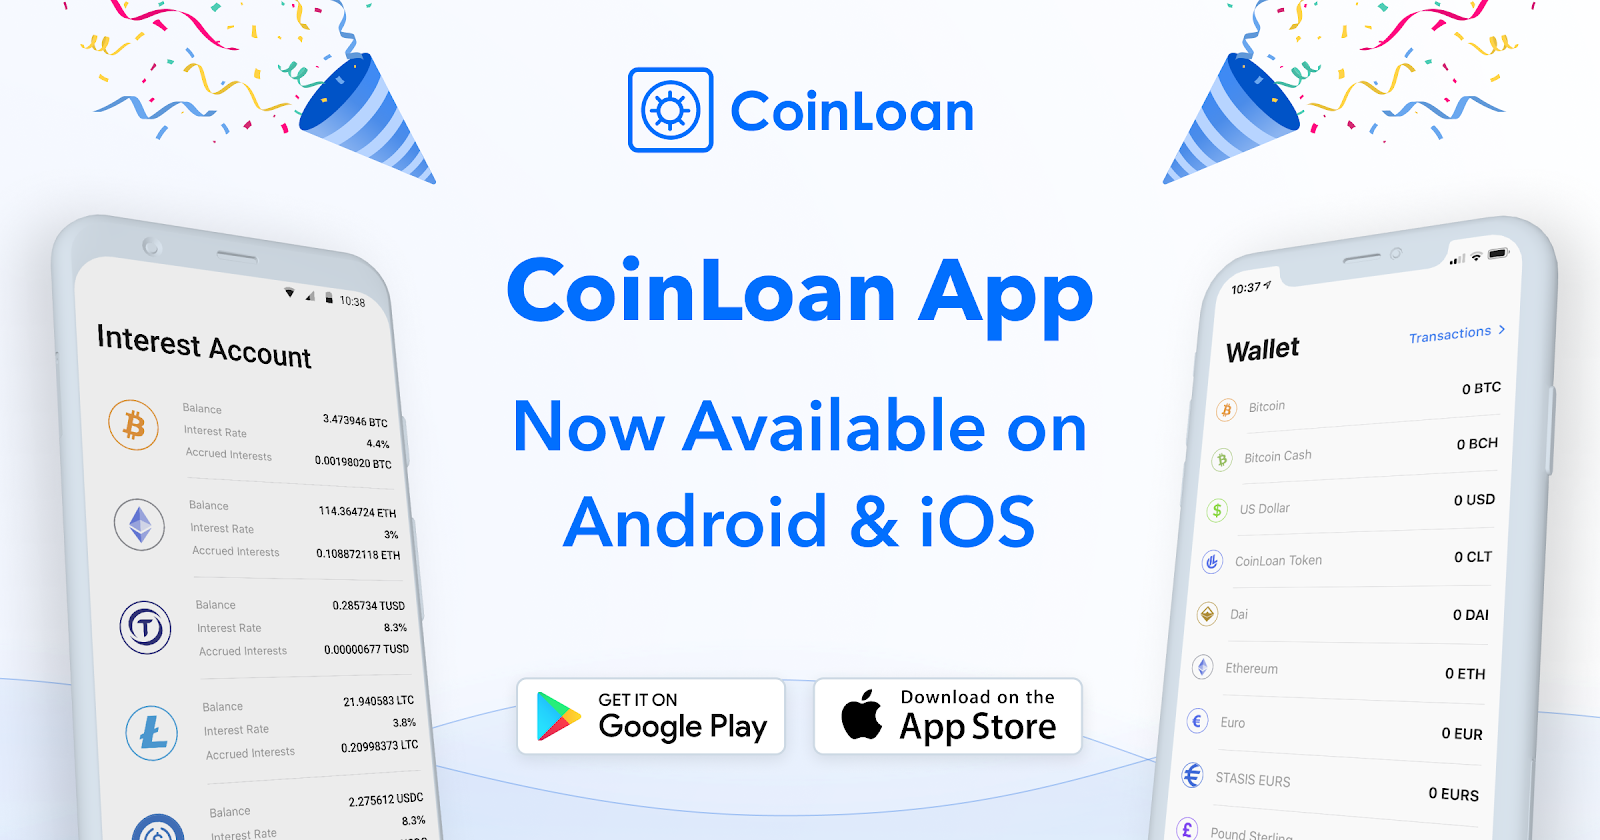 CoinLoan Brand New Mobile App Goes Live